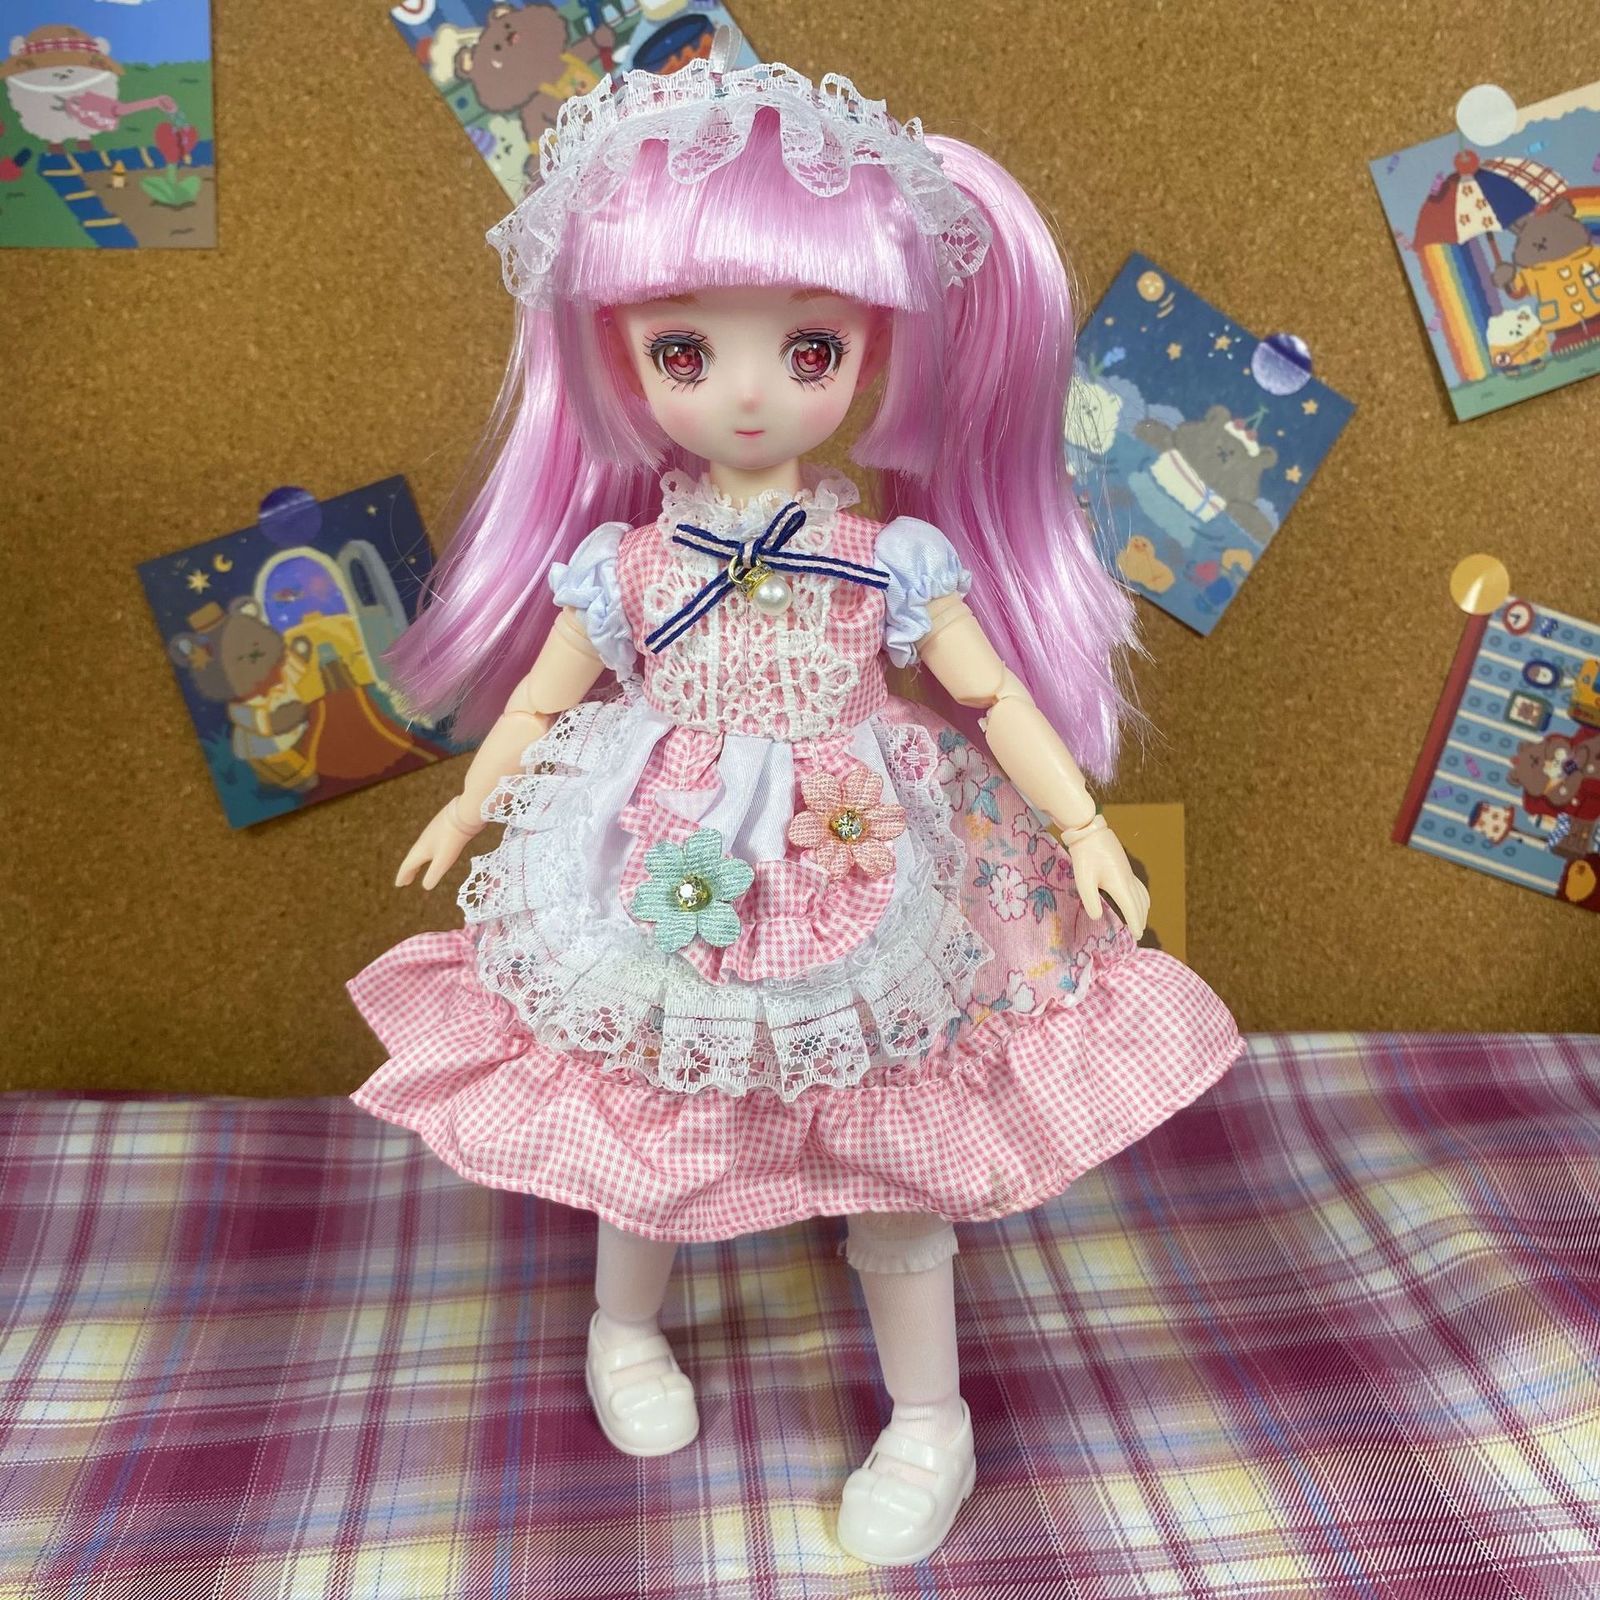 Mm-9-Doll with Clothes